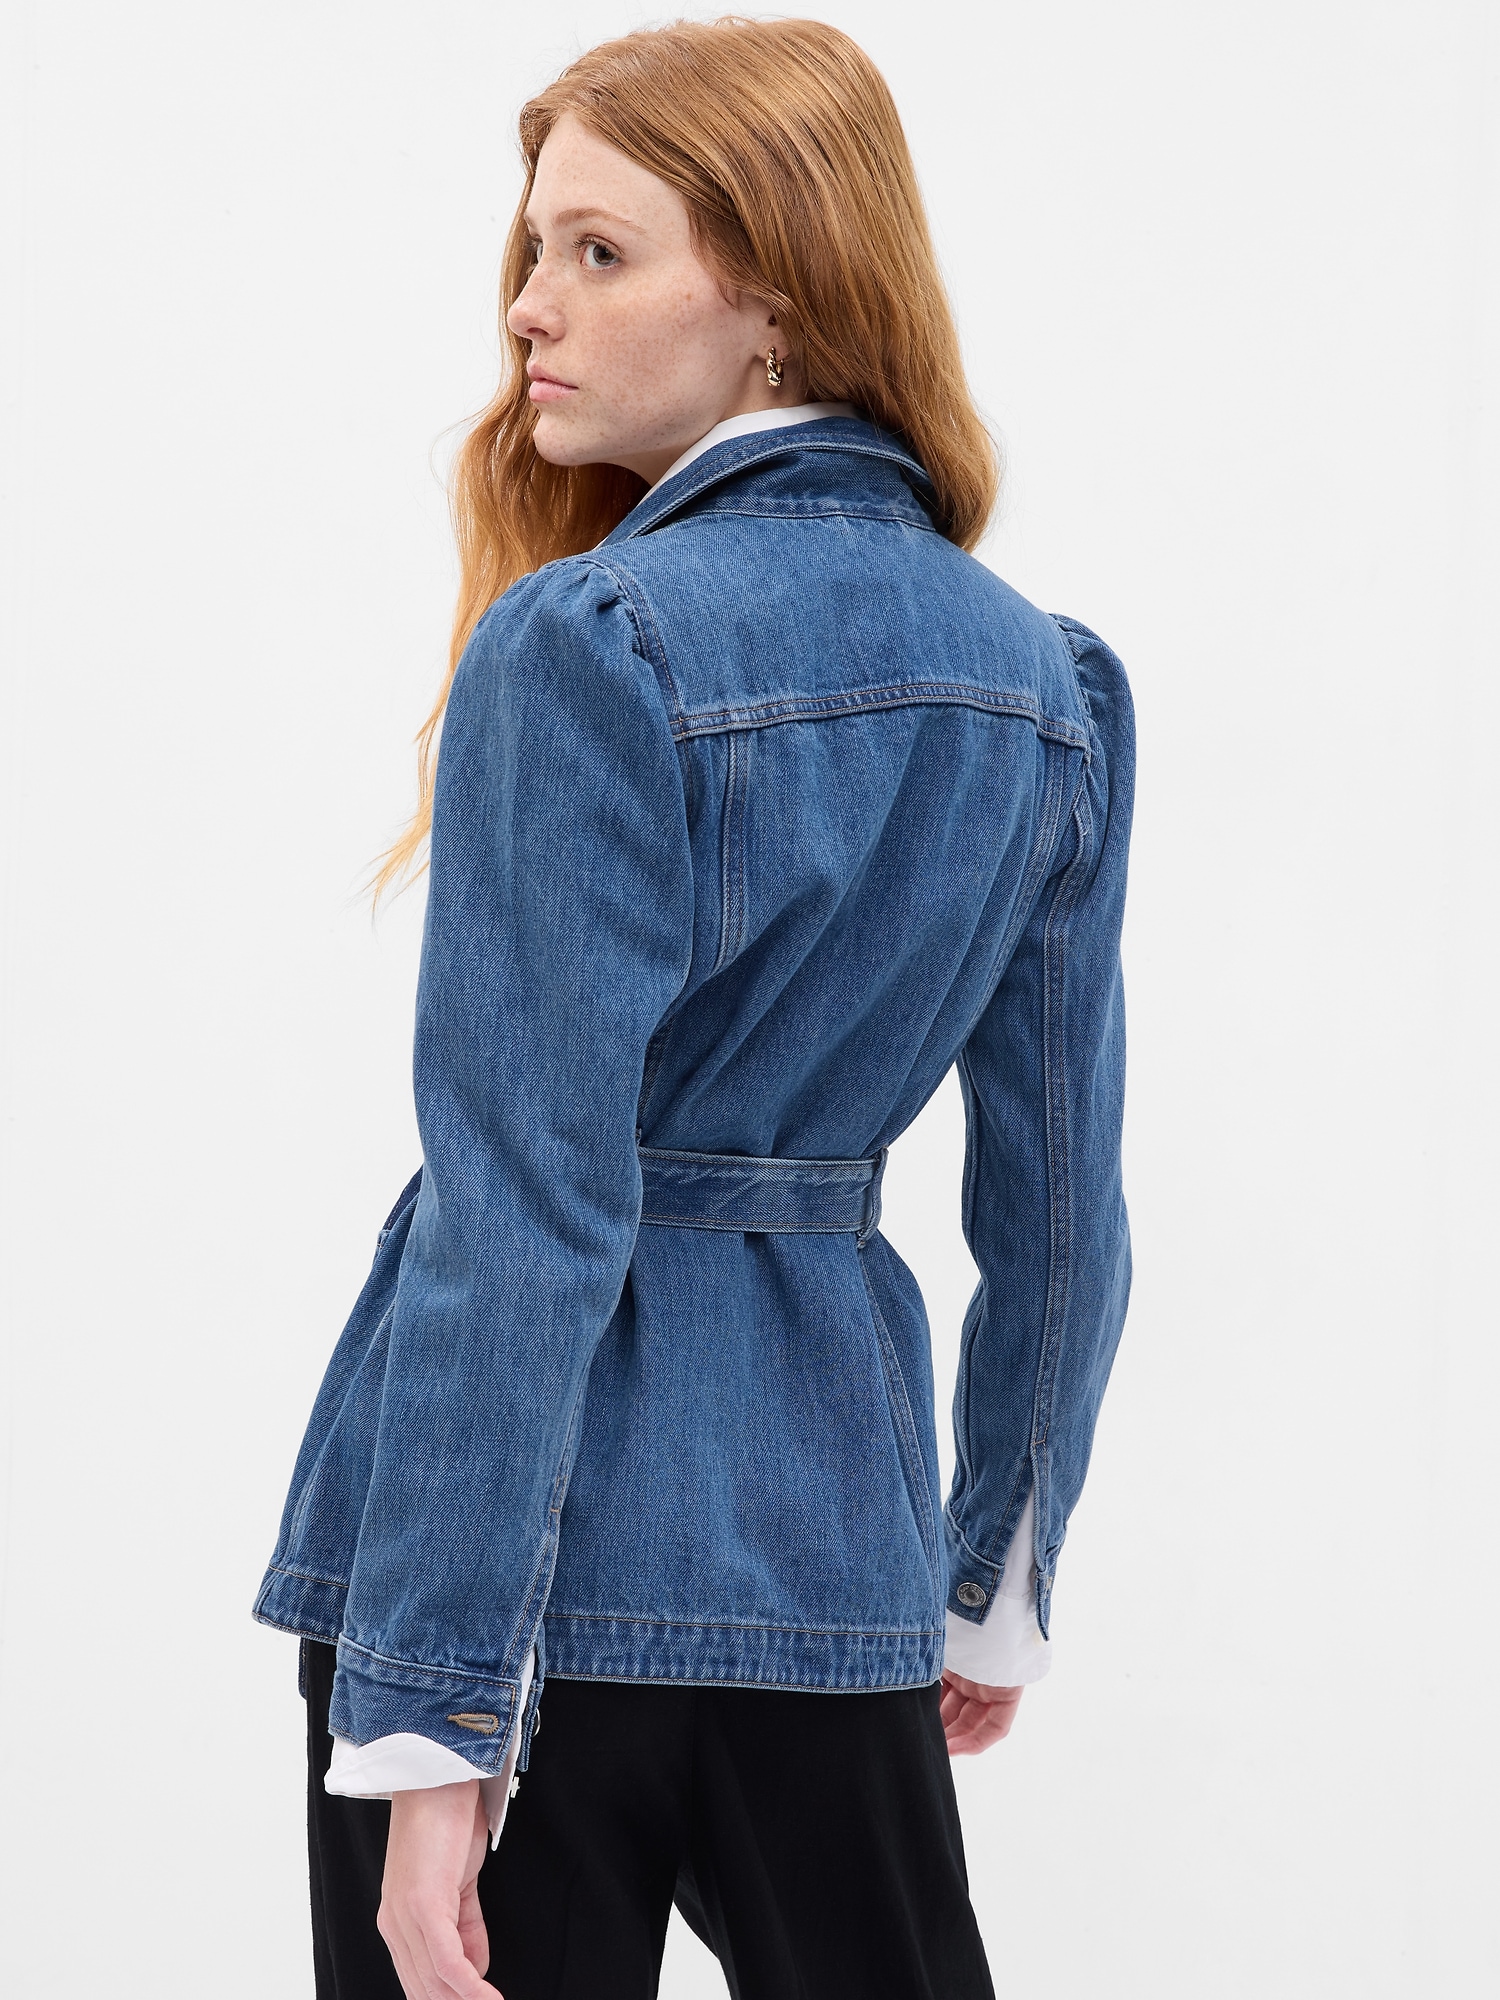 Belted Puff Sleeve Denim Jacket with Washwell | Gap Factory